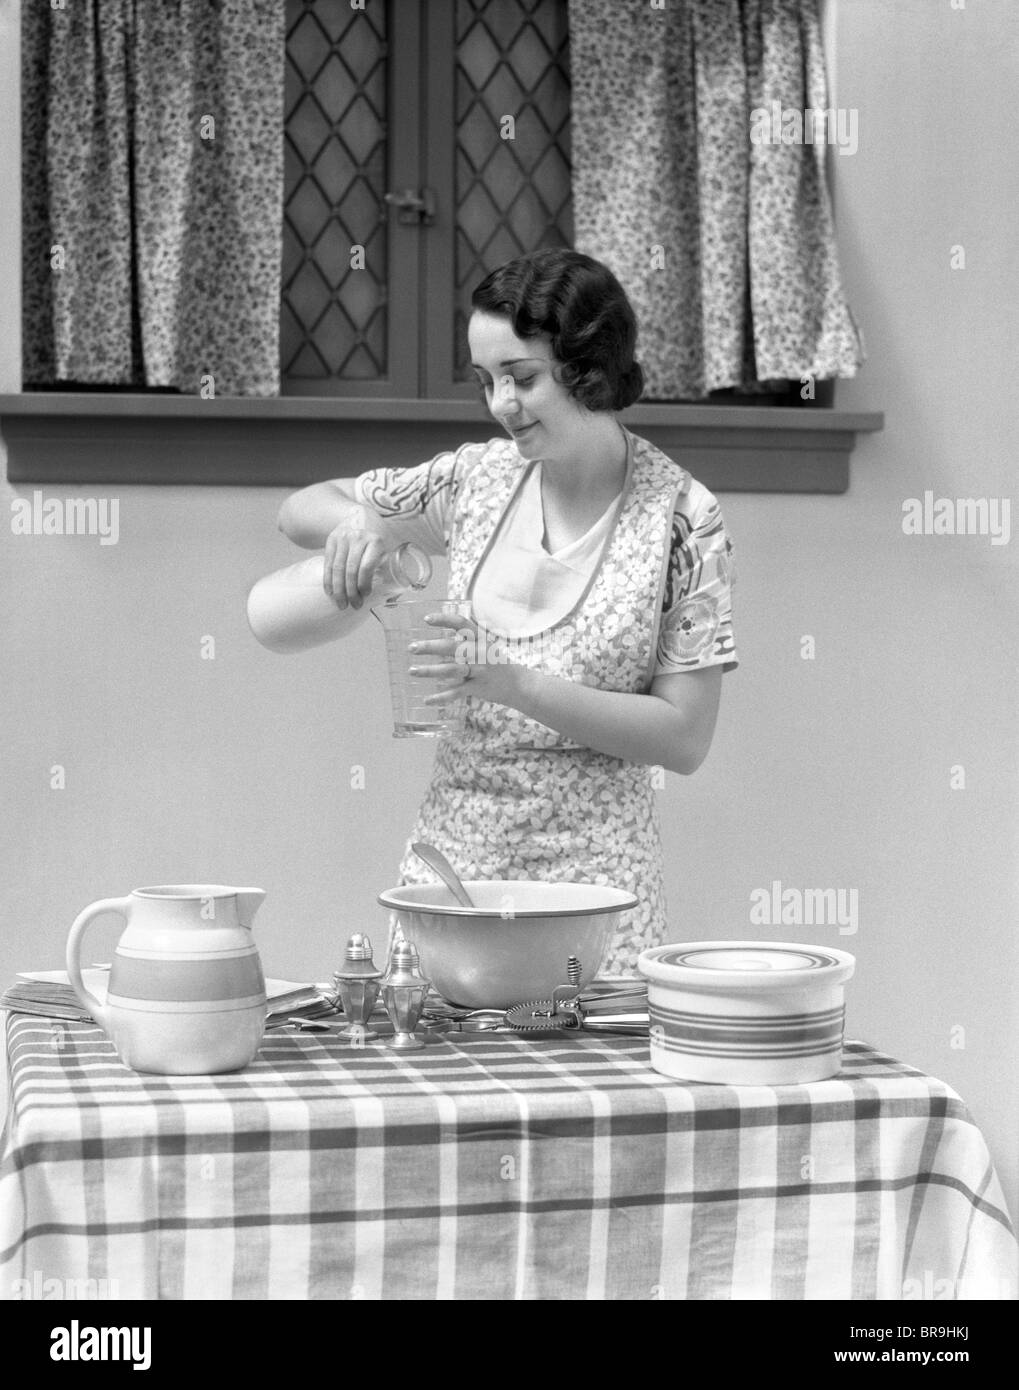 1920s 1930s WOMAN POURING MILK INTO MEASURING CUP Stock Photo